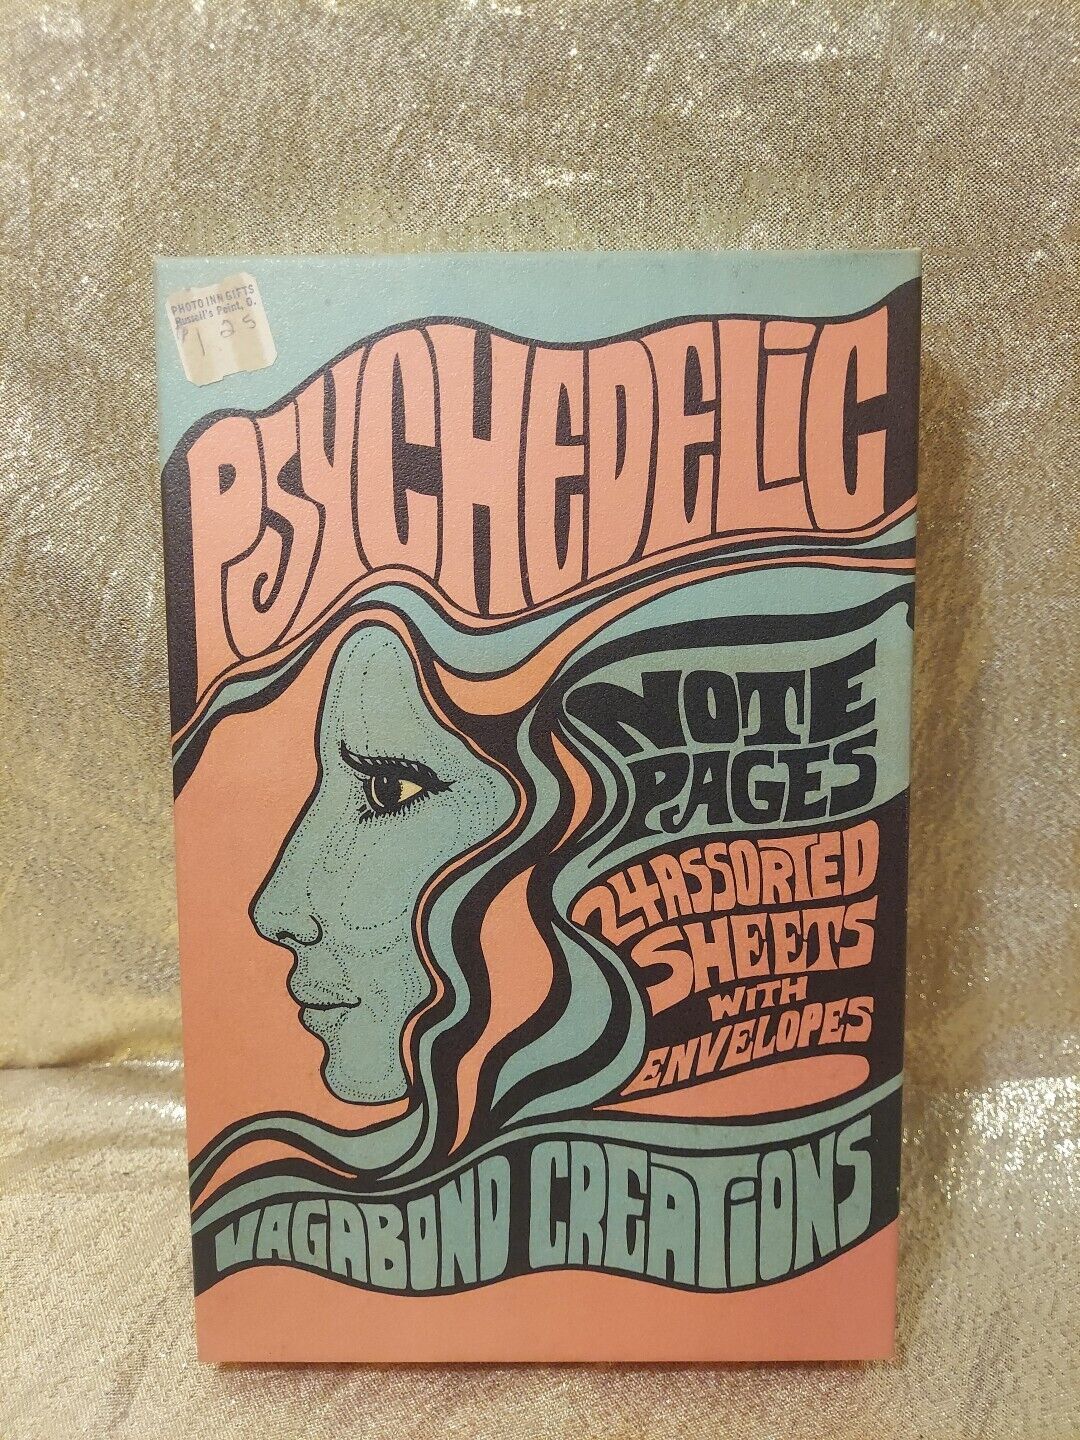 Vintage 1968 Vagabond Creations Psychedelic 24 Pages Inspired By Grateful Dead